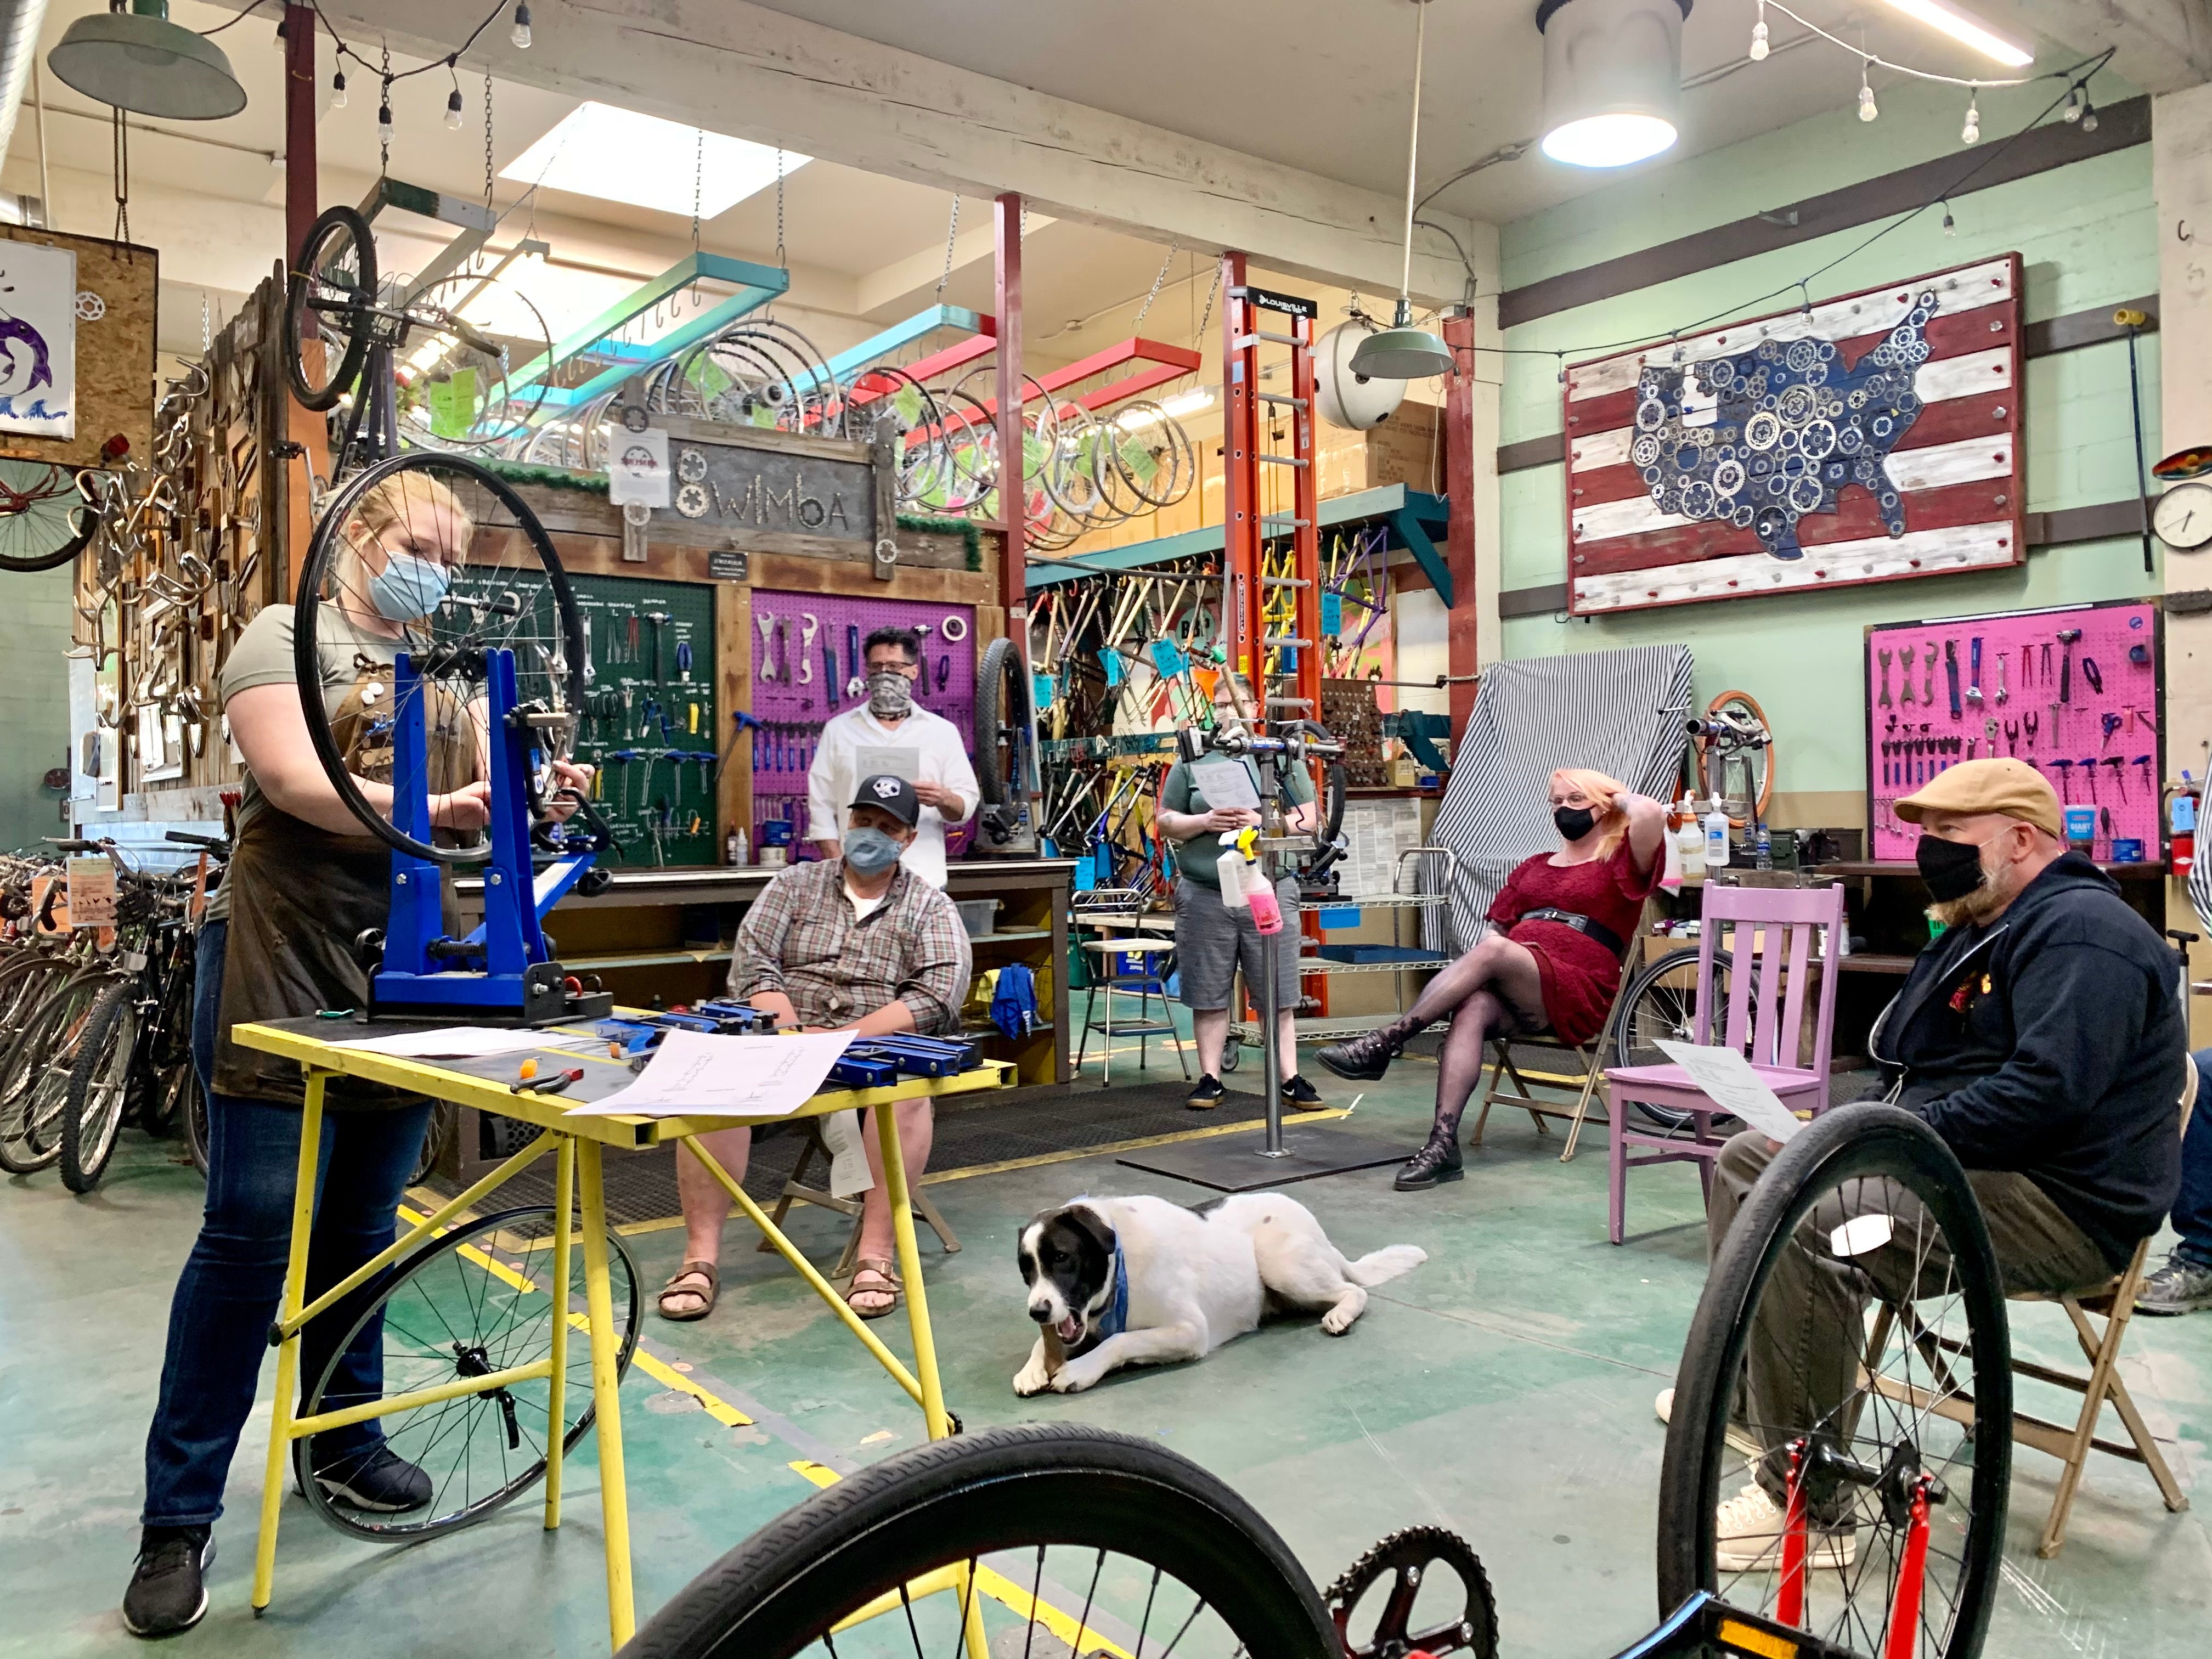 Group attends a workshop at the Boise Bicycle Project